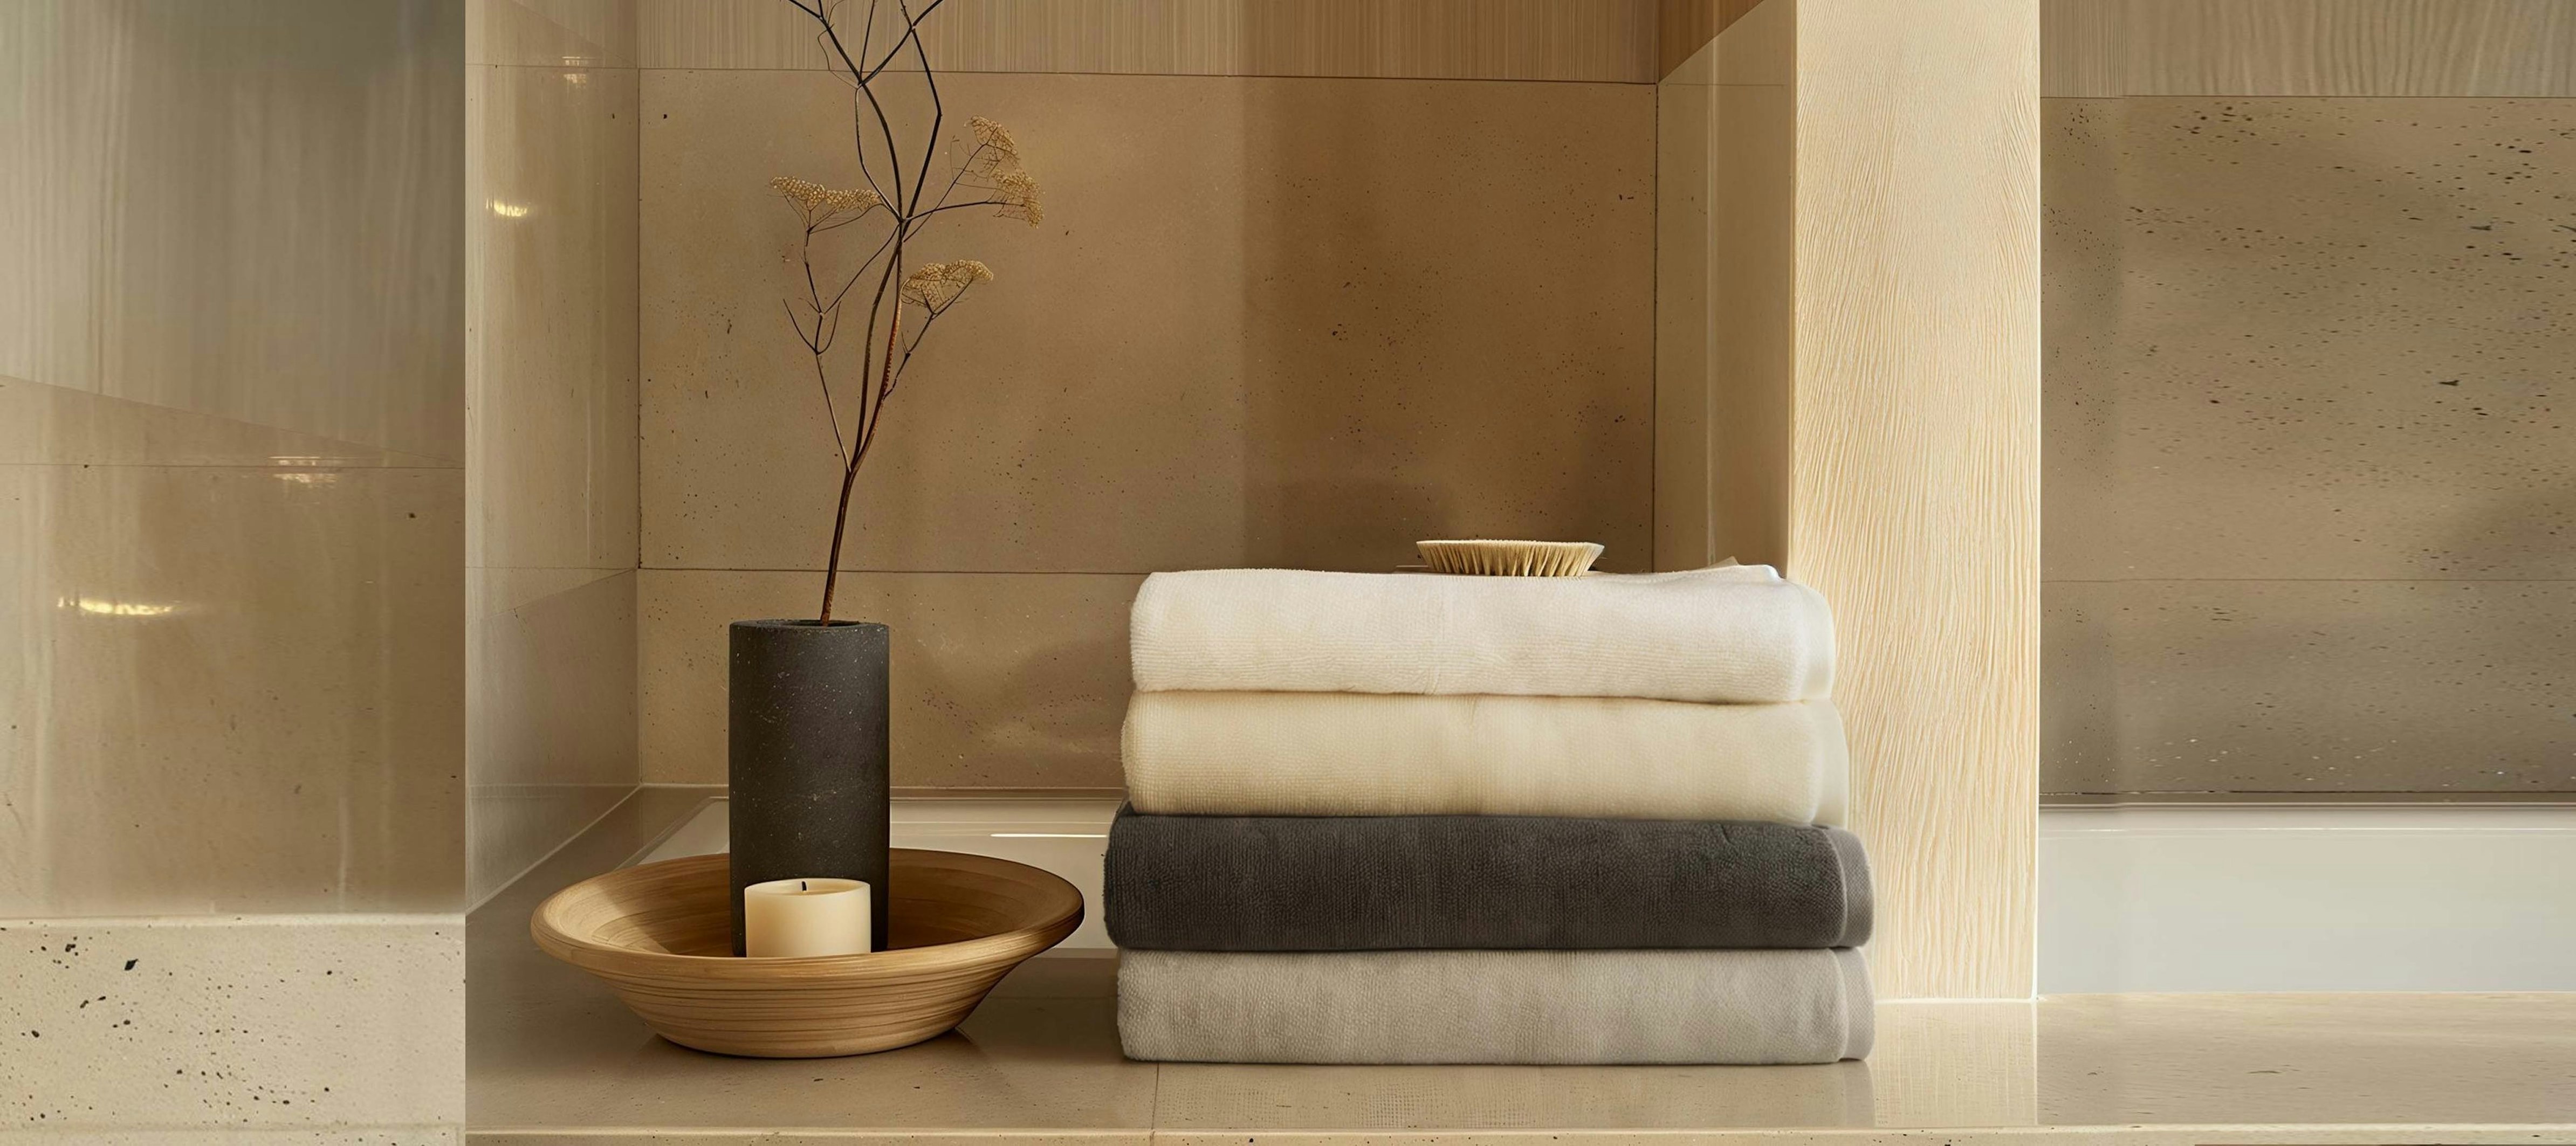 Ultraplush towels in different colors